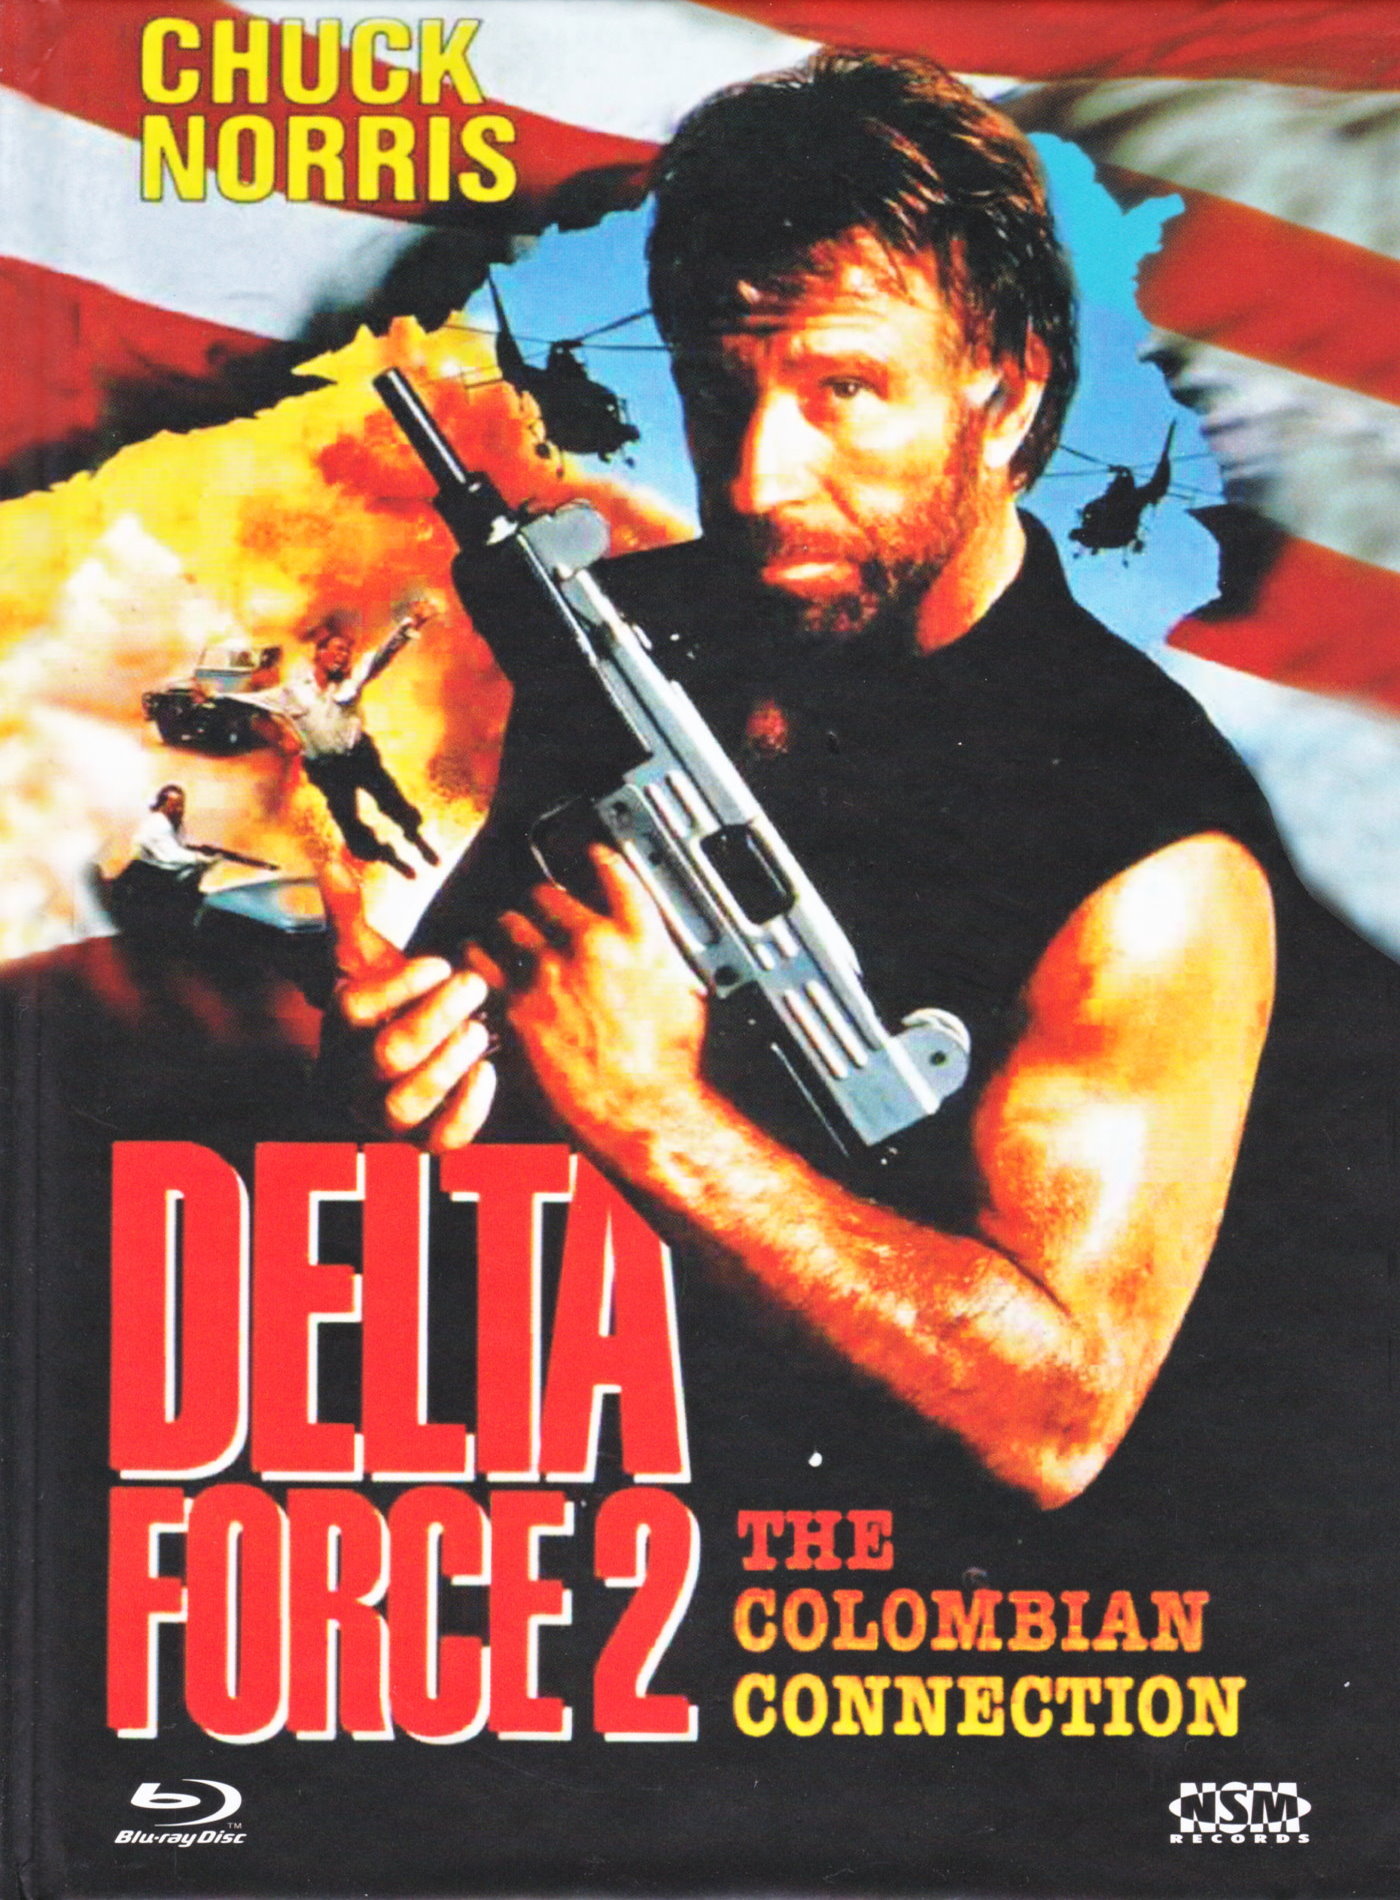 Cover - Delta Force 2 - The Colombian Connection.jpg